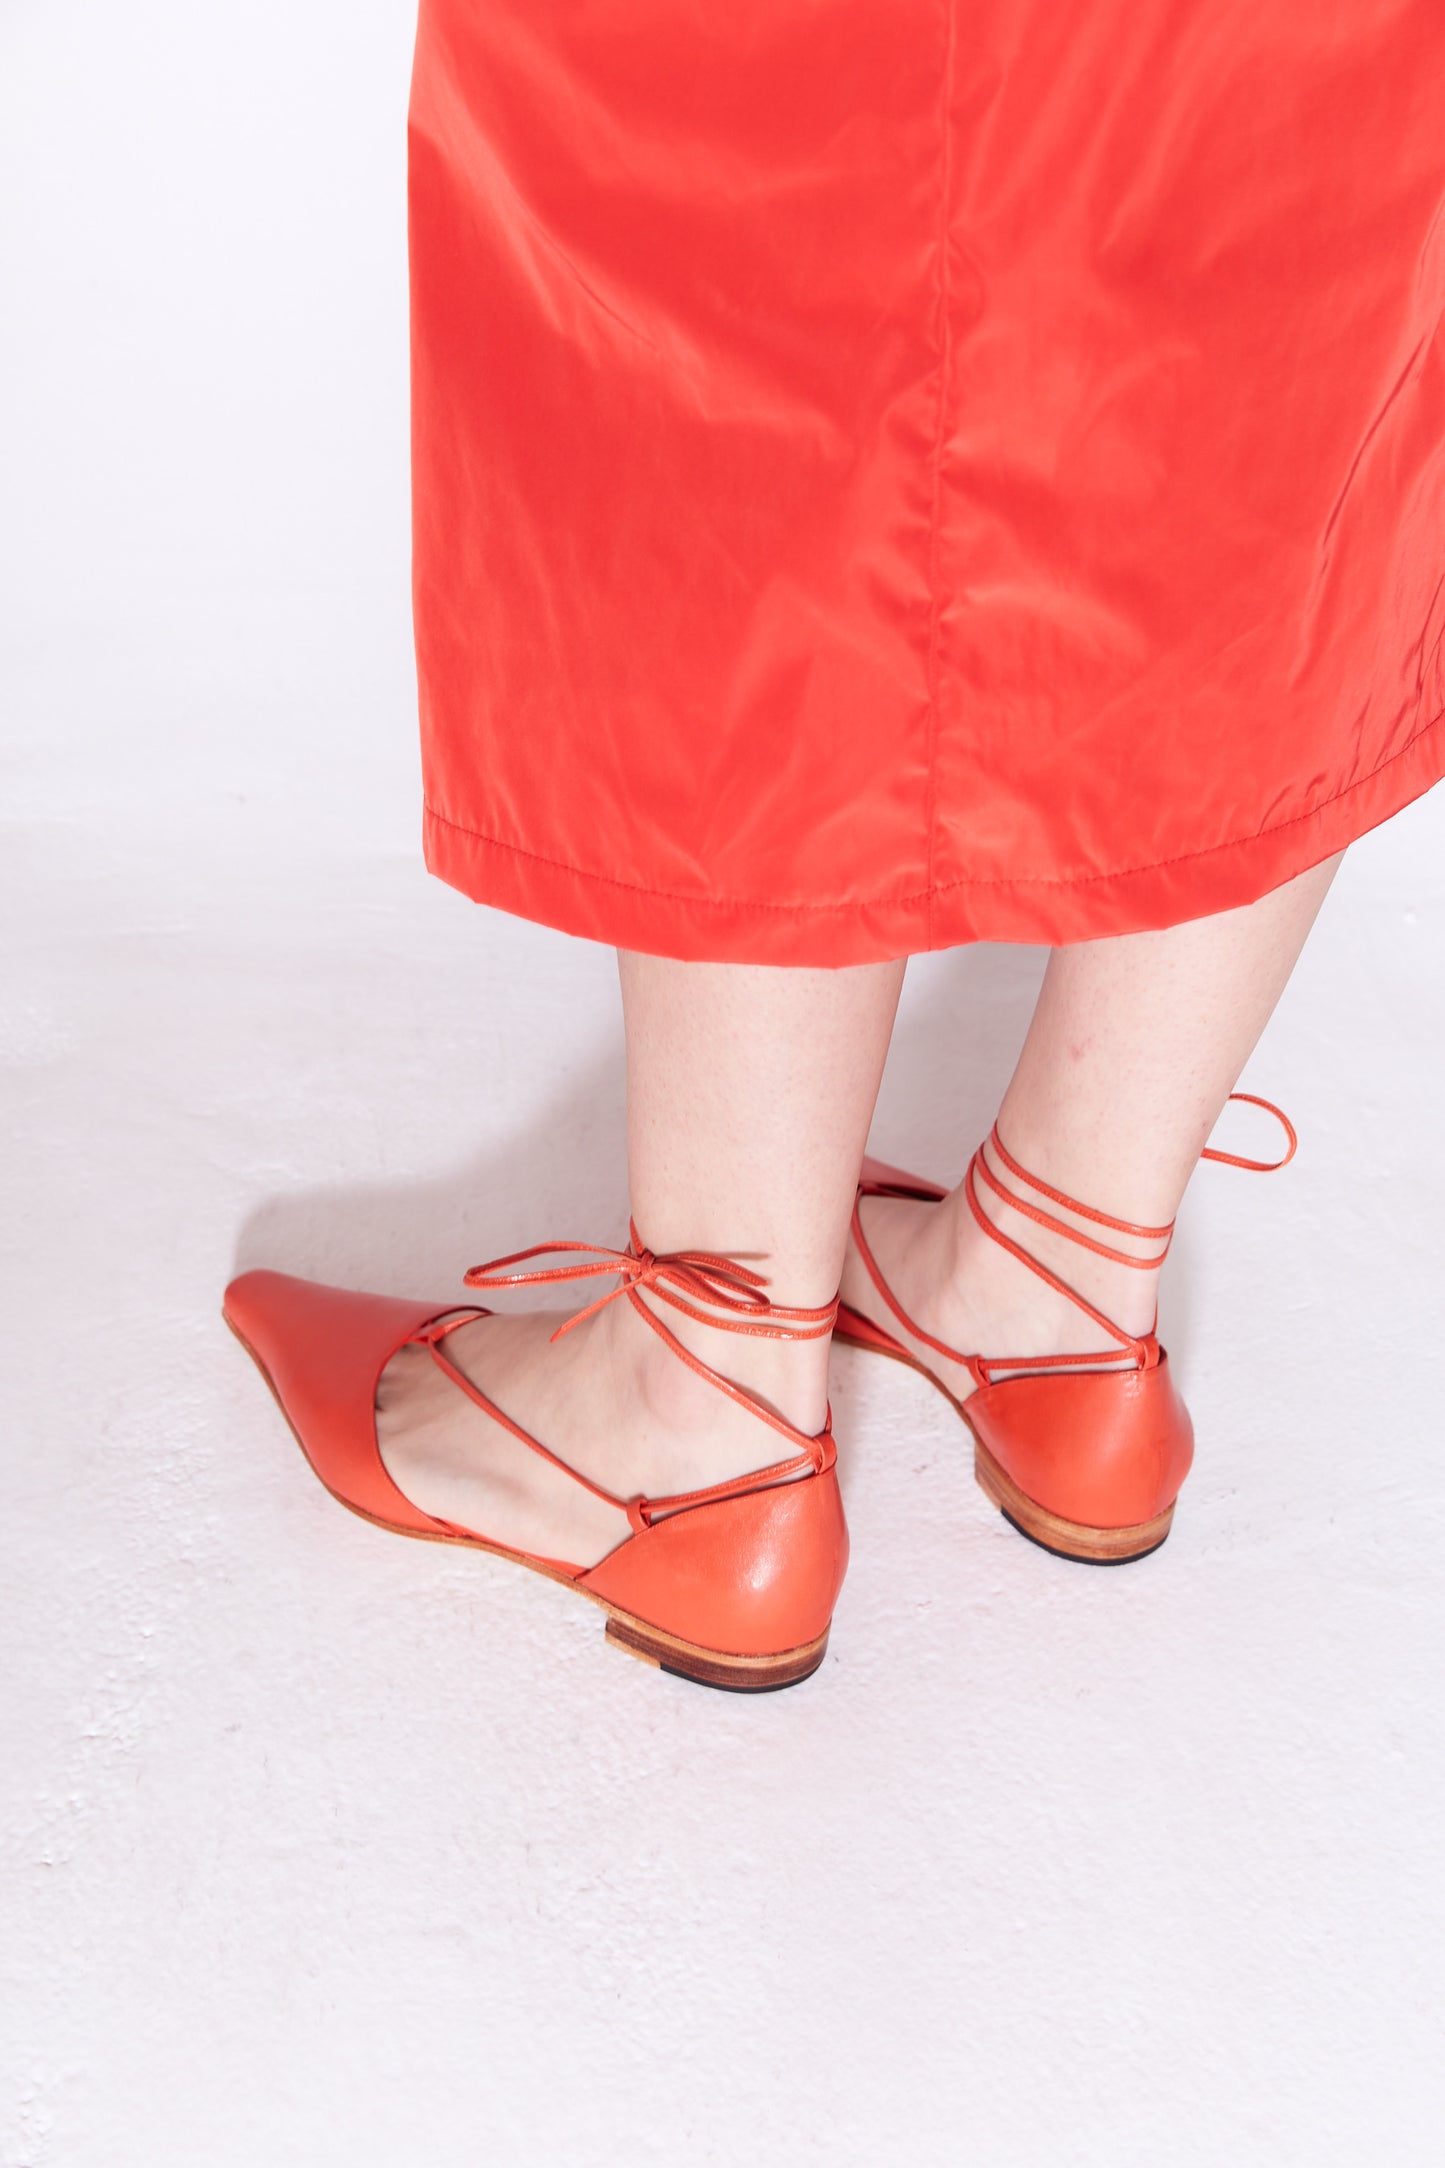 The Paloma Lace Up Flat in Tomato